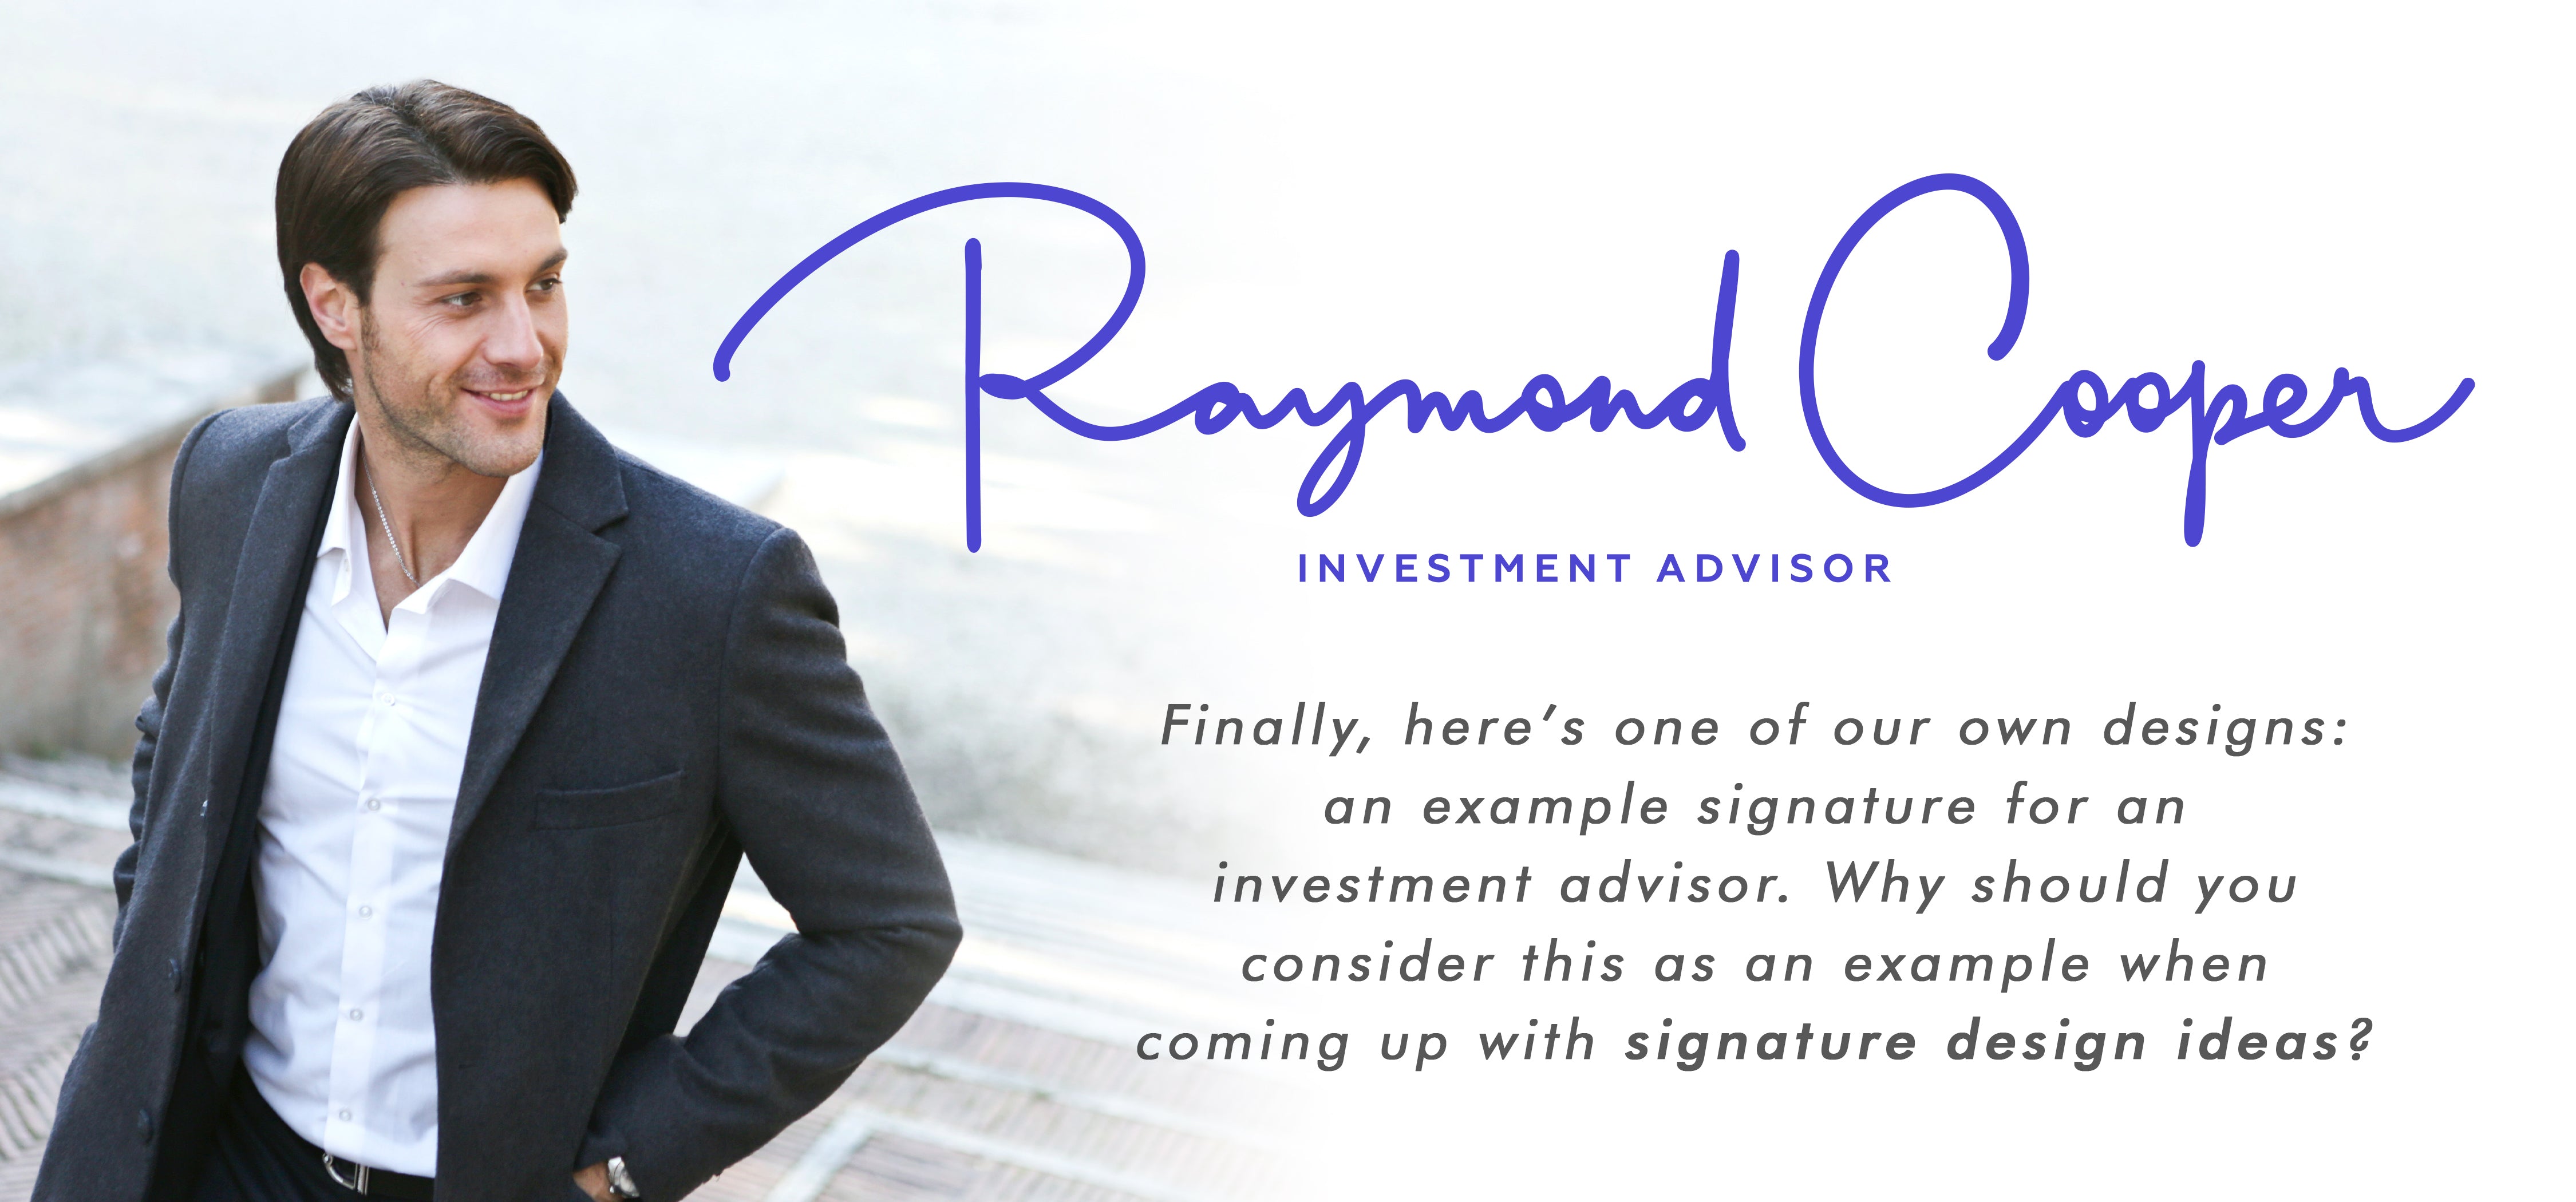 Finally, here’s one of our own designs: an example signature for an investment advisor. Why should you consider this as an example when coming up with signature design ideas?